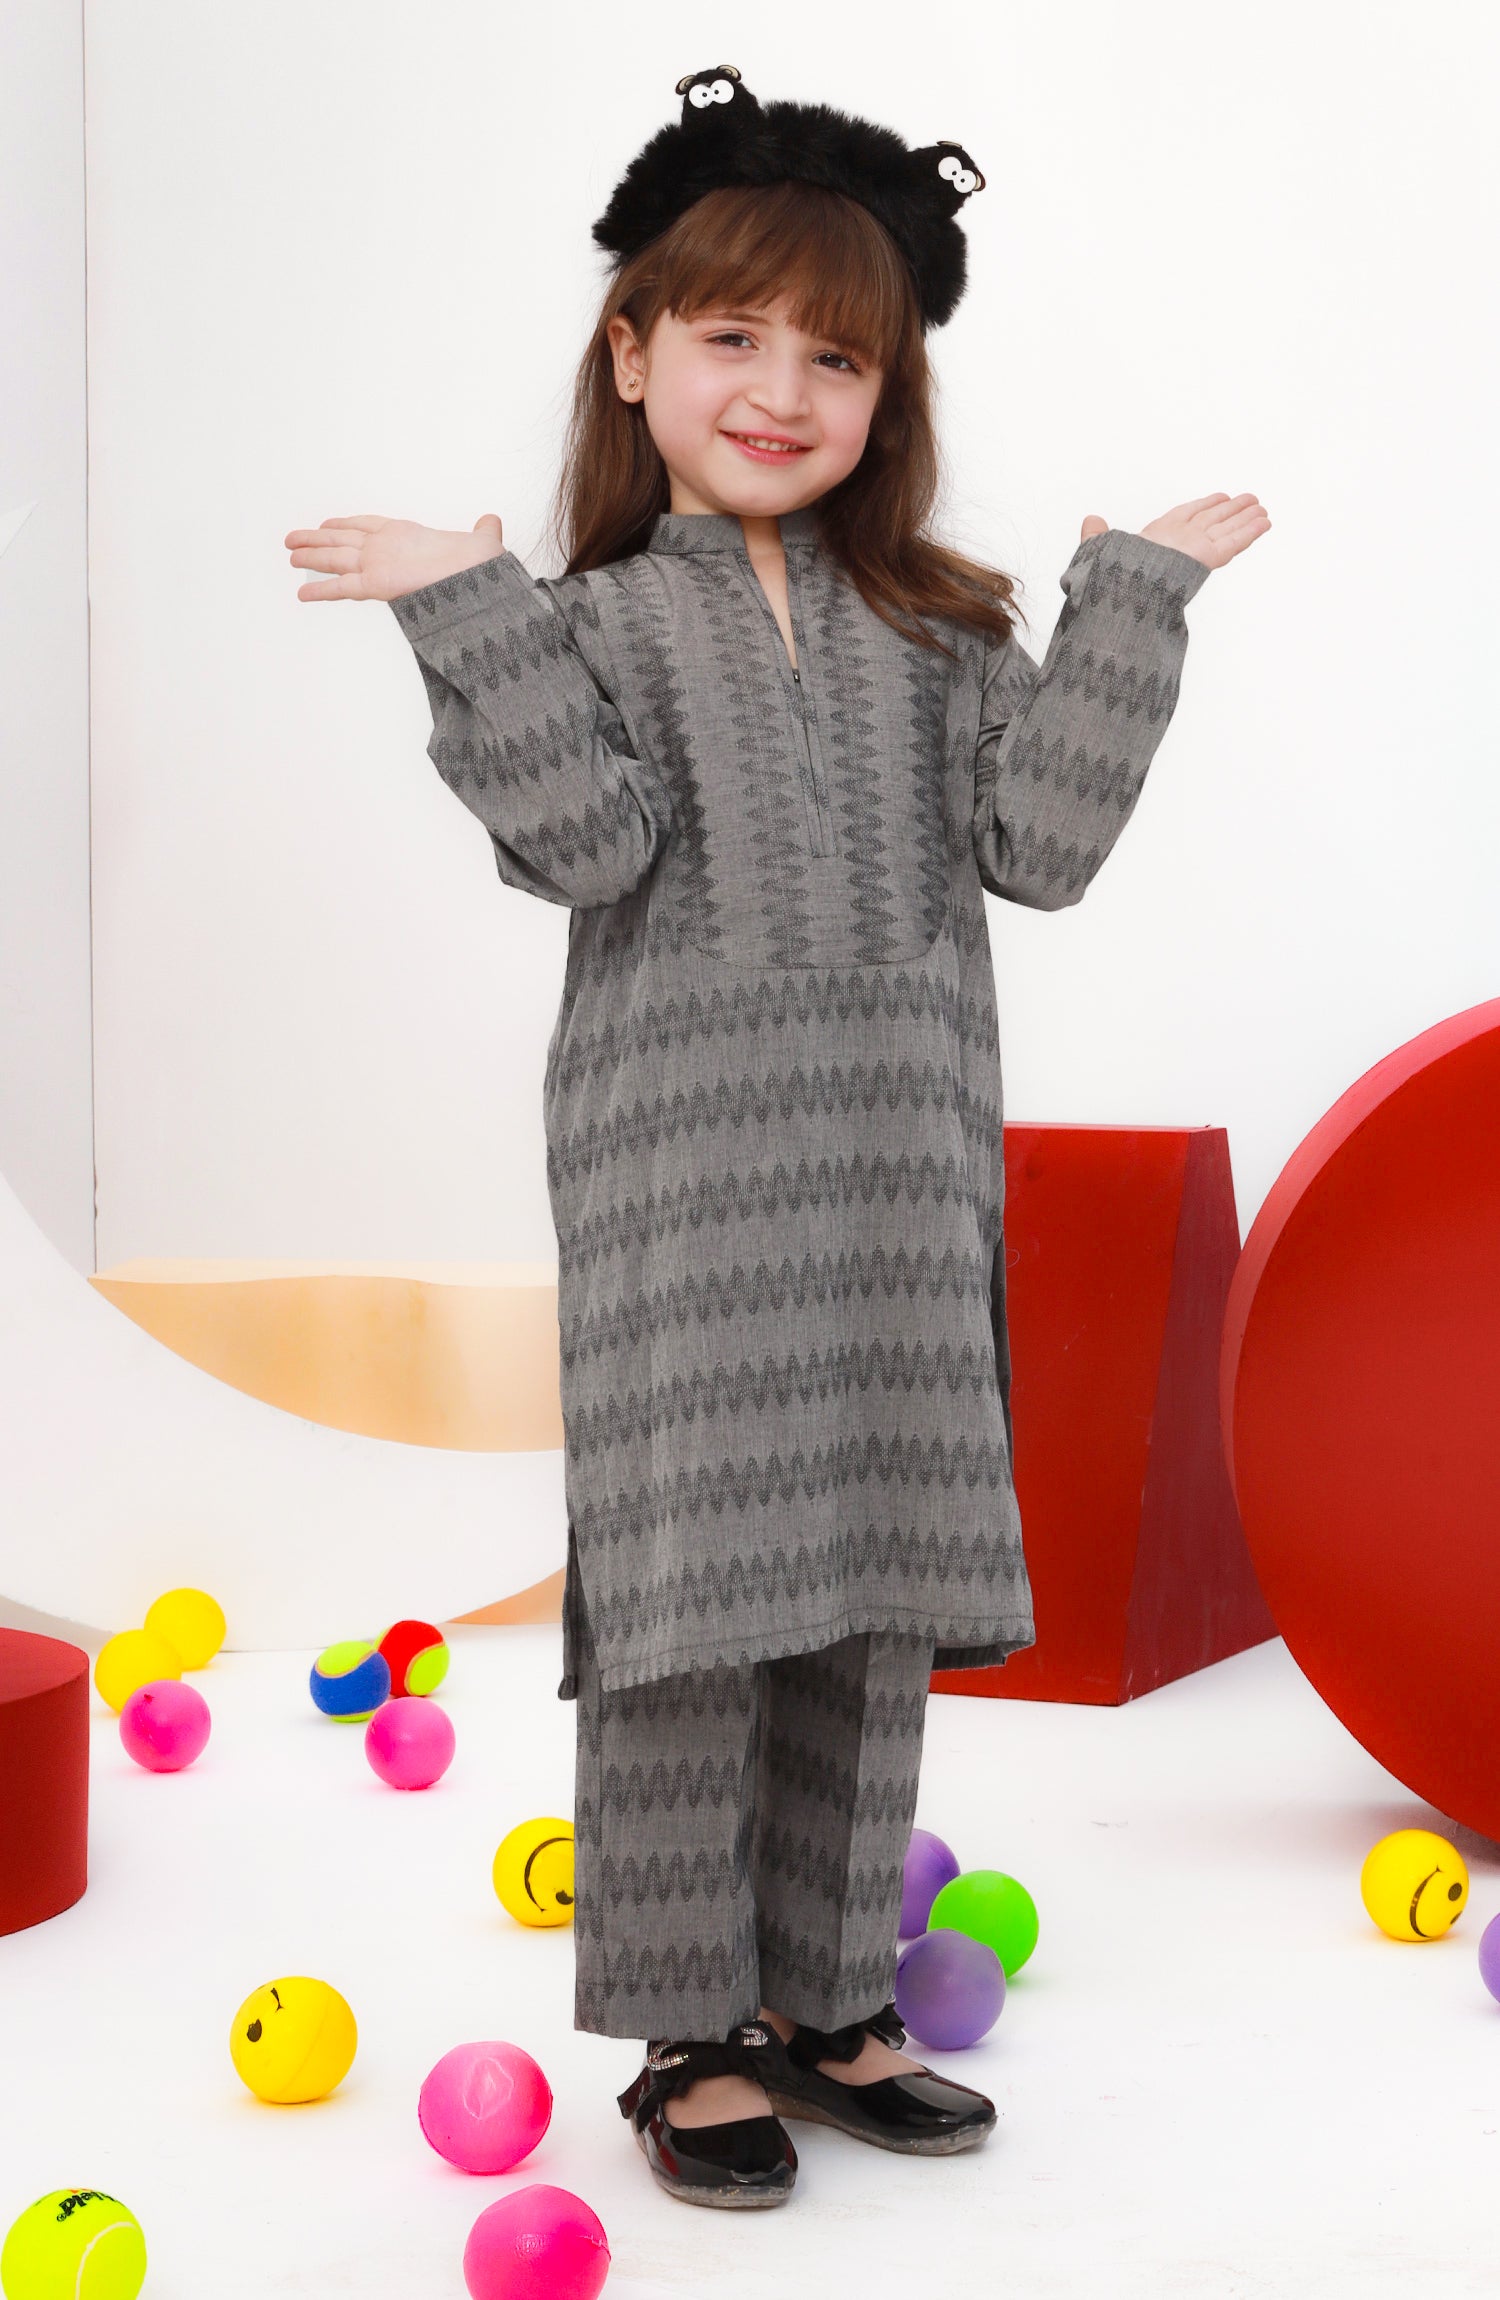 SUMMER'23 RAW CHARM PRINTED GIRLS 2PC STITCHED SUIT